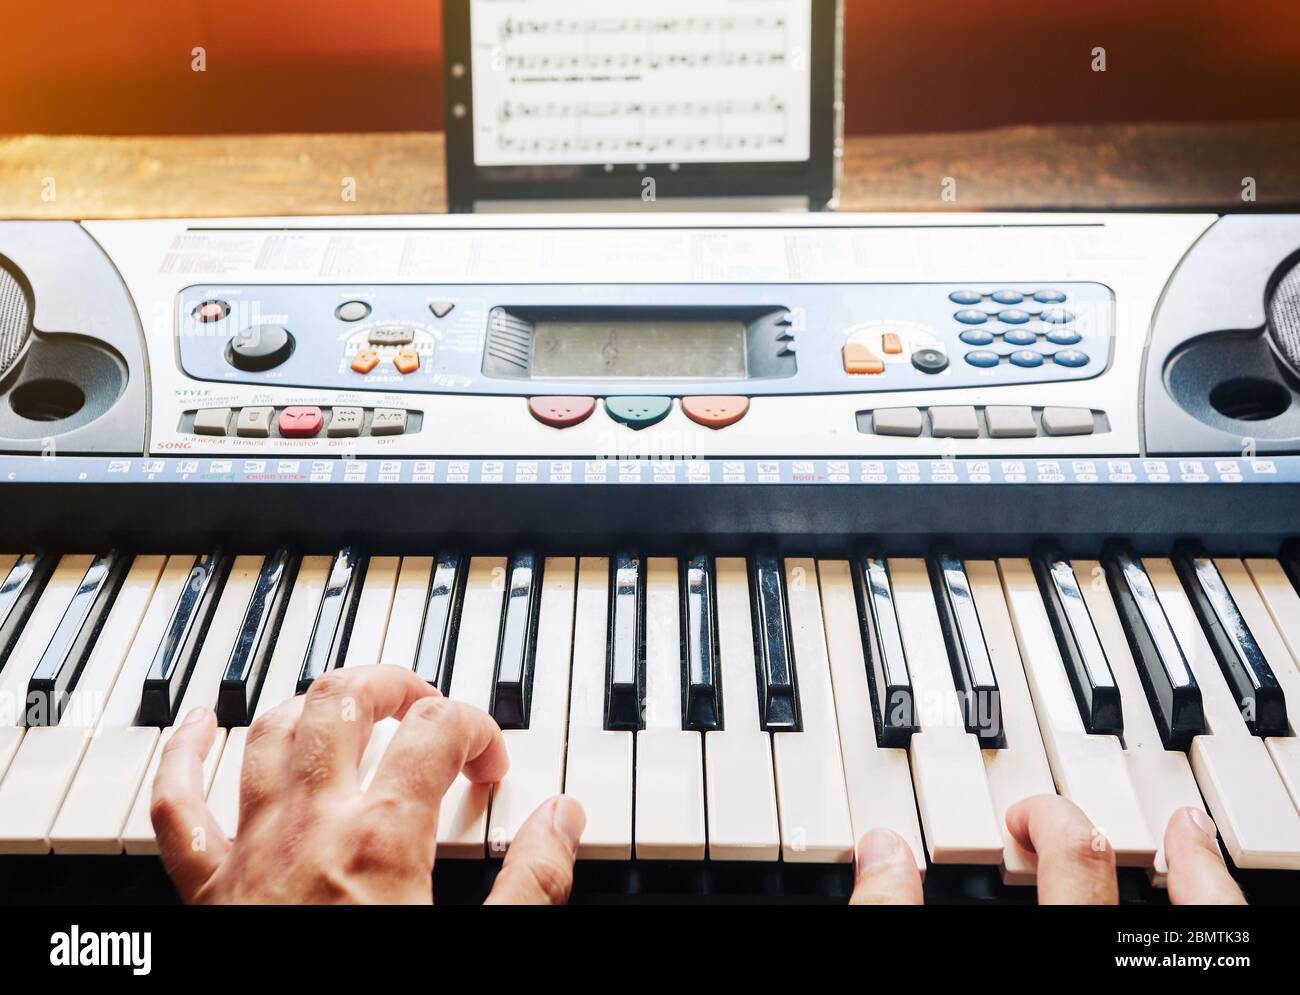 Man playing piano at home while using a tablet to read the scores Stock Photo